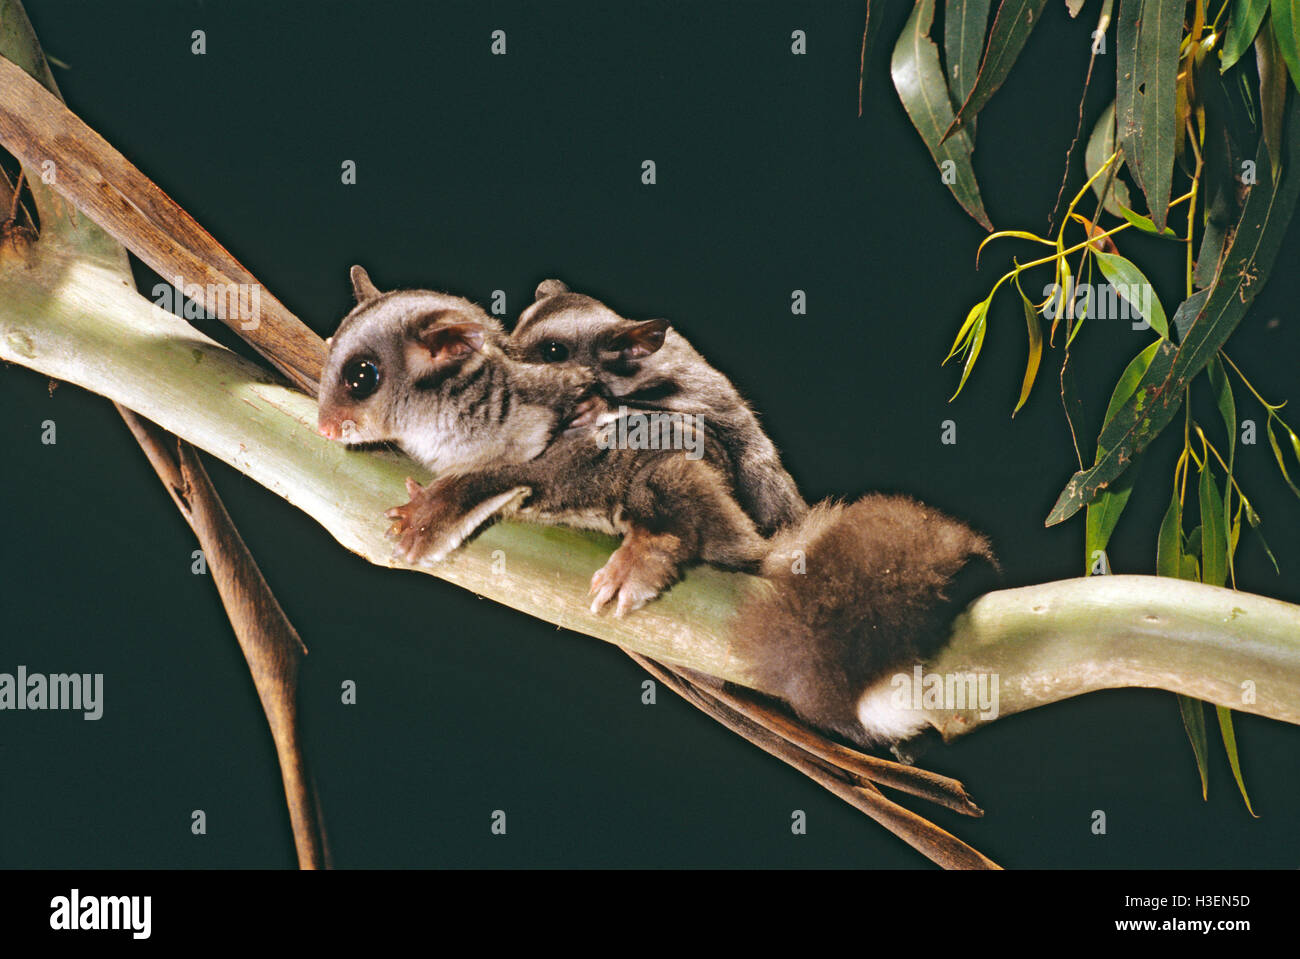 Sugar glider (Petaurus breviceps), female and young about 95 days old. Australia. Stock Photo